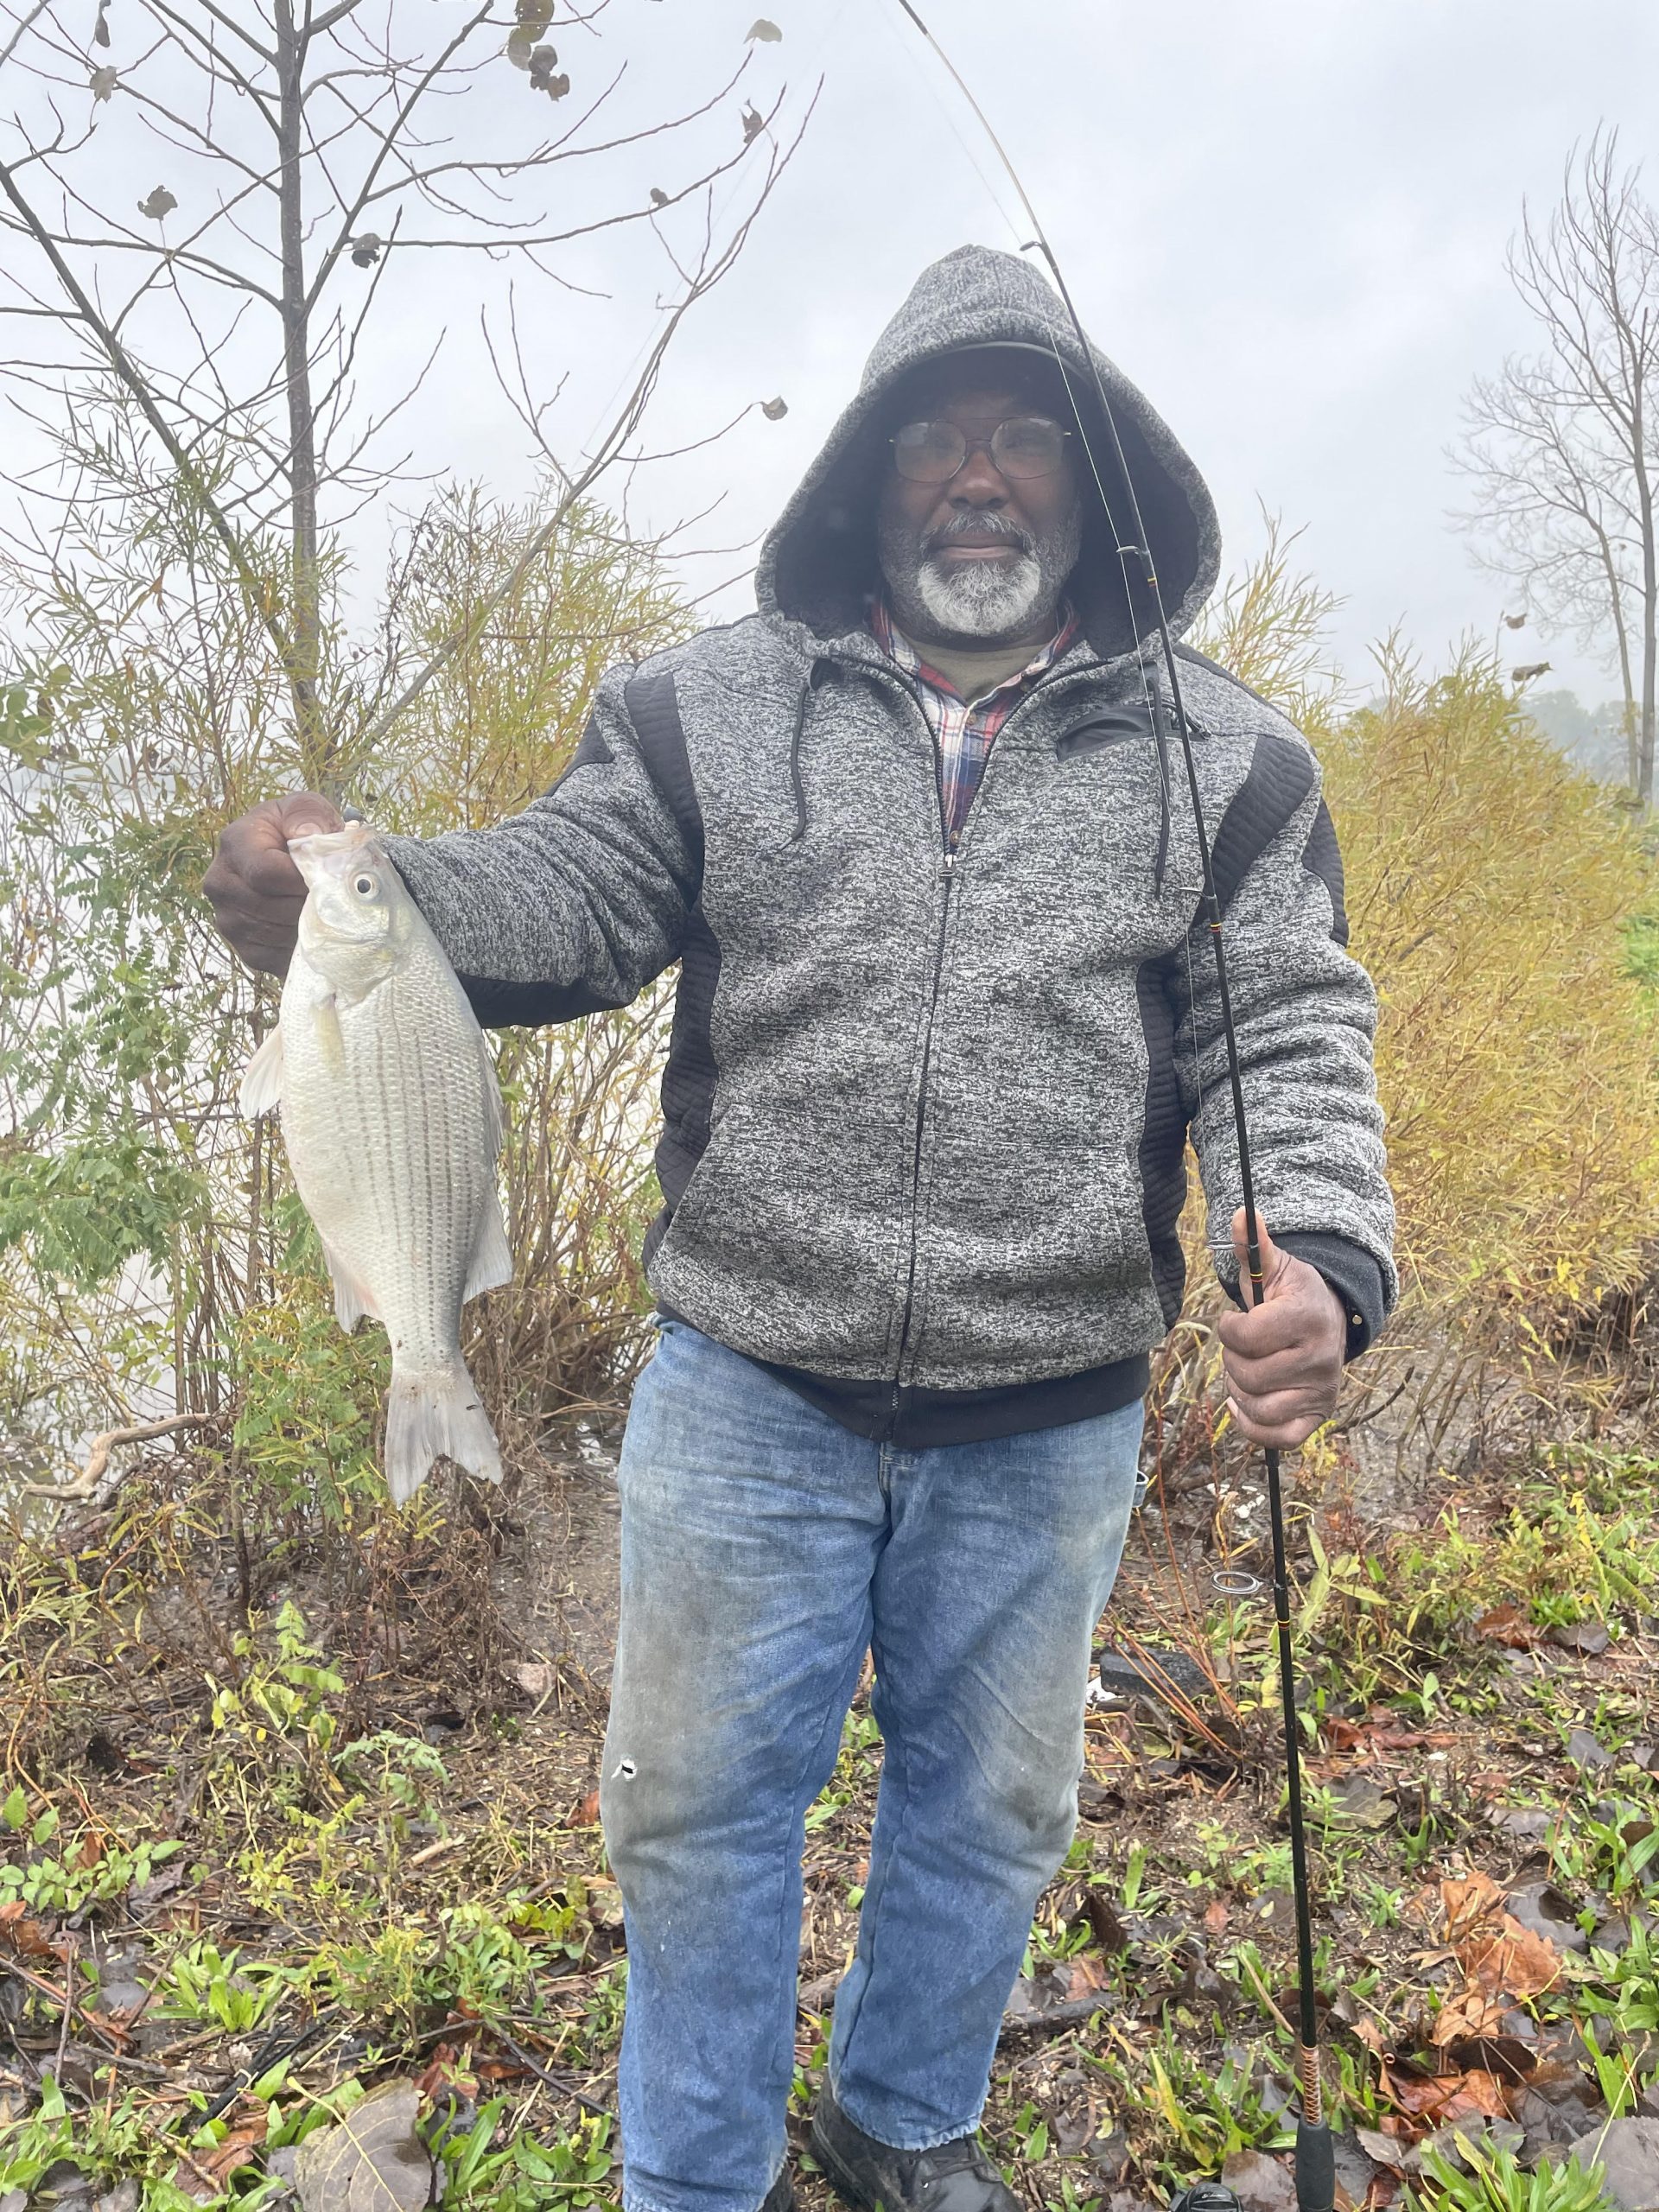 MAUMEE RIVER REPORT- OCTOBER 30, 2021